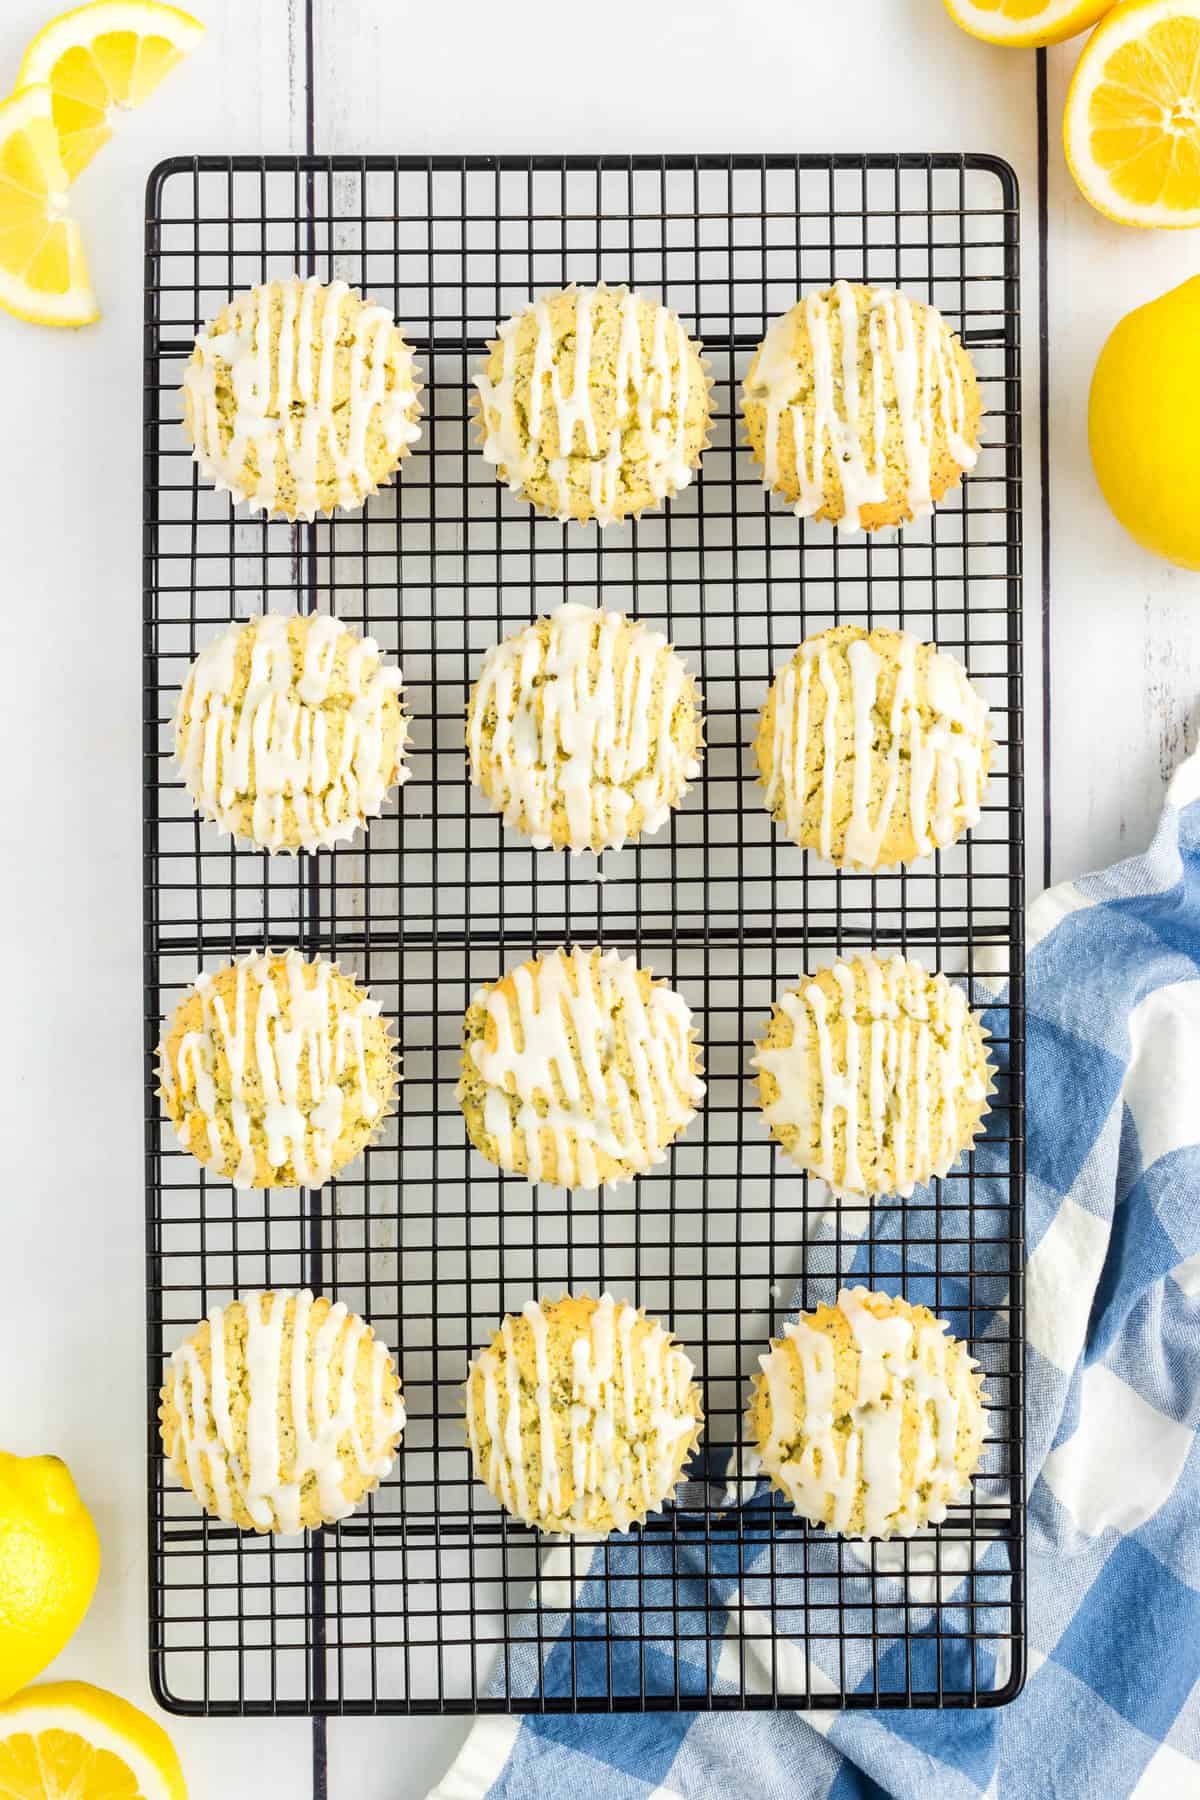 Glaze Drizzled on Lemon Poppy Seed Muffins Atop Cooling Rack